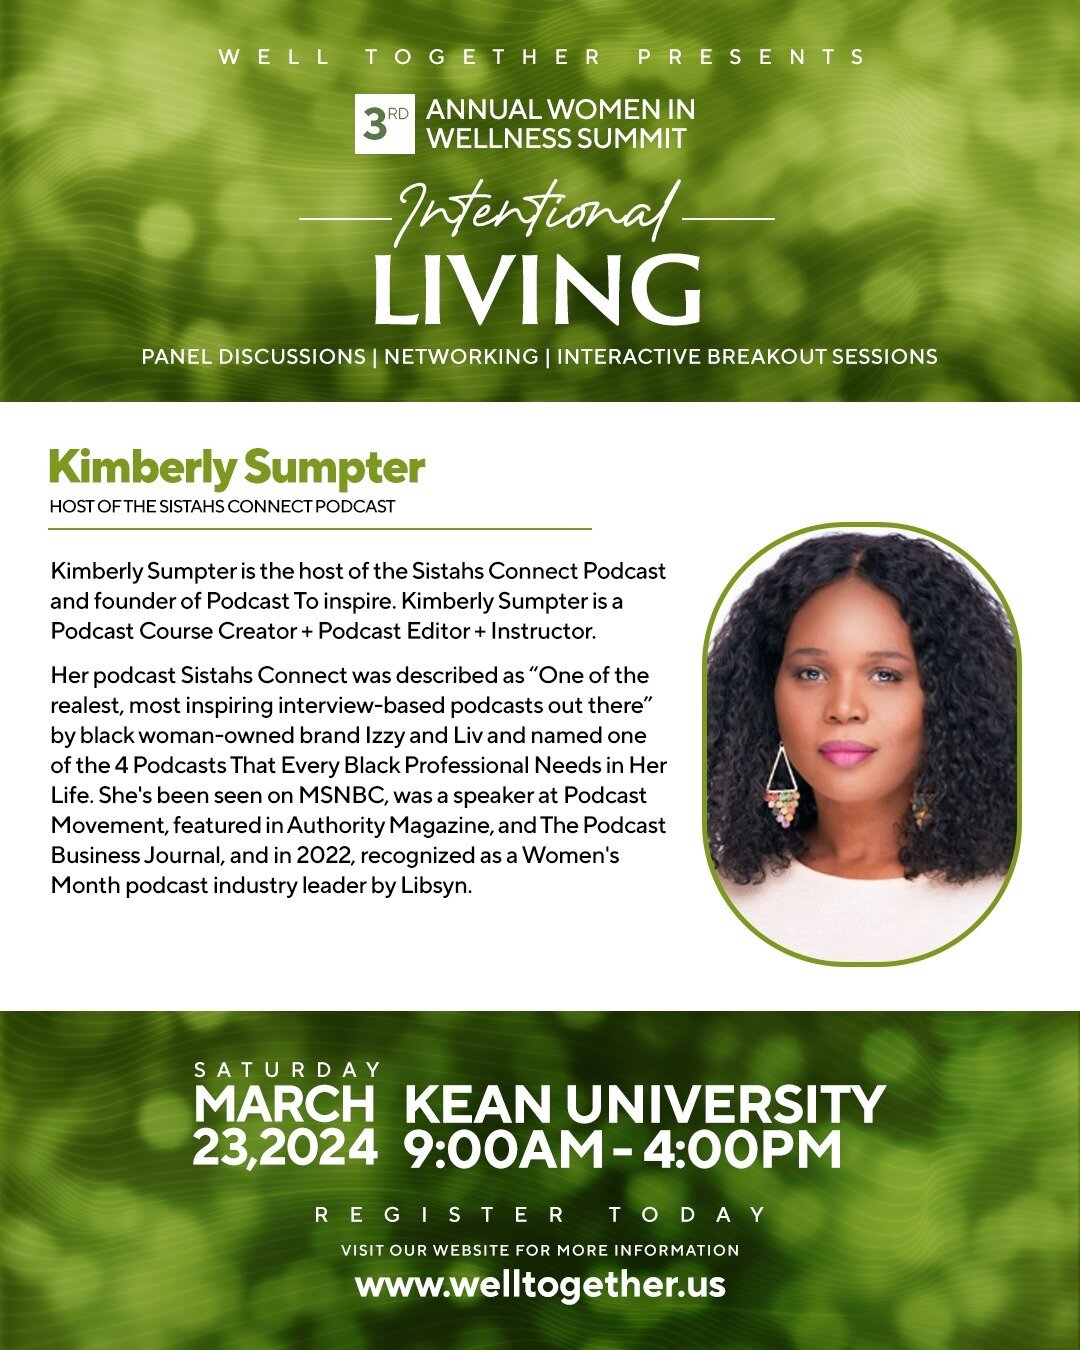 Exciting News! Save the Date for the 3rd Annual Women in Wellness Summit on March 23, 2024, at Kean University! I'm thrilled to be a part of this empowering event, hosted by @welltogetherllc, celebrating women in wellness and supporting your holistic